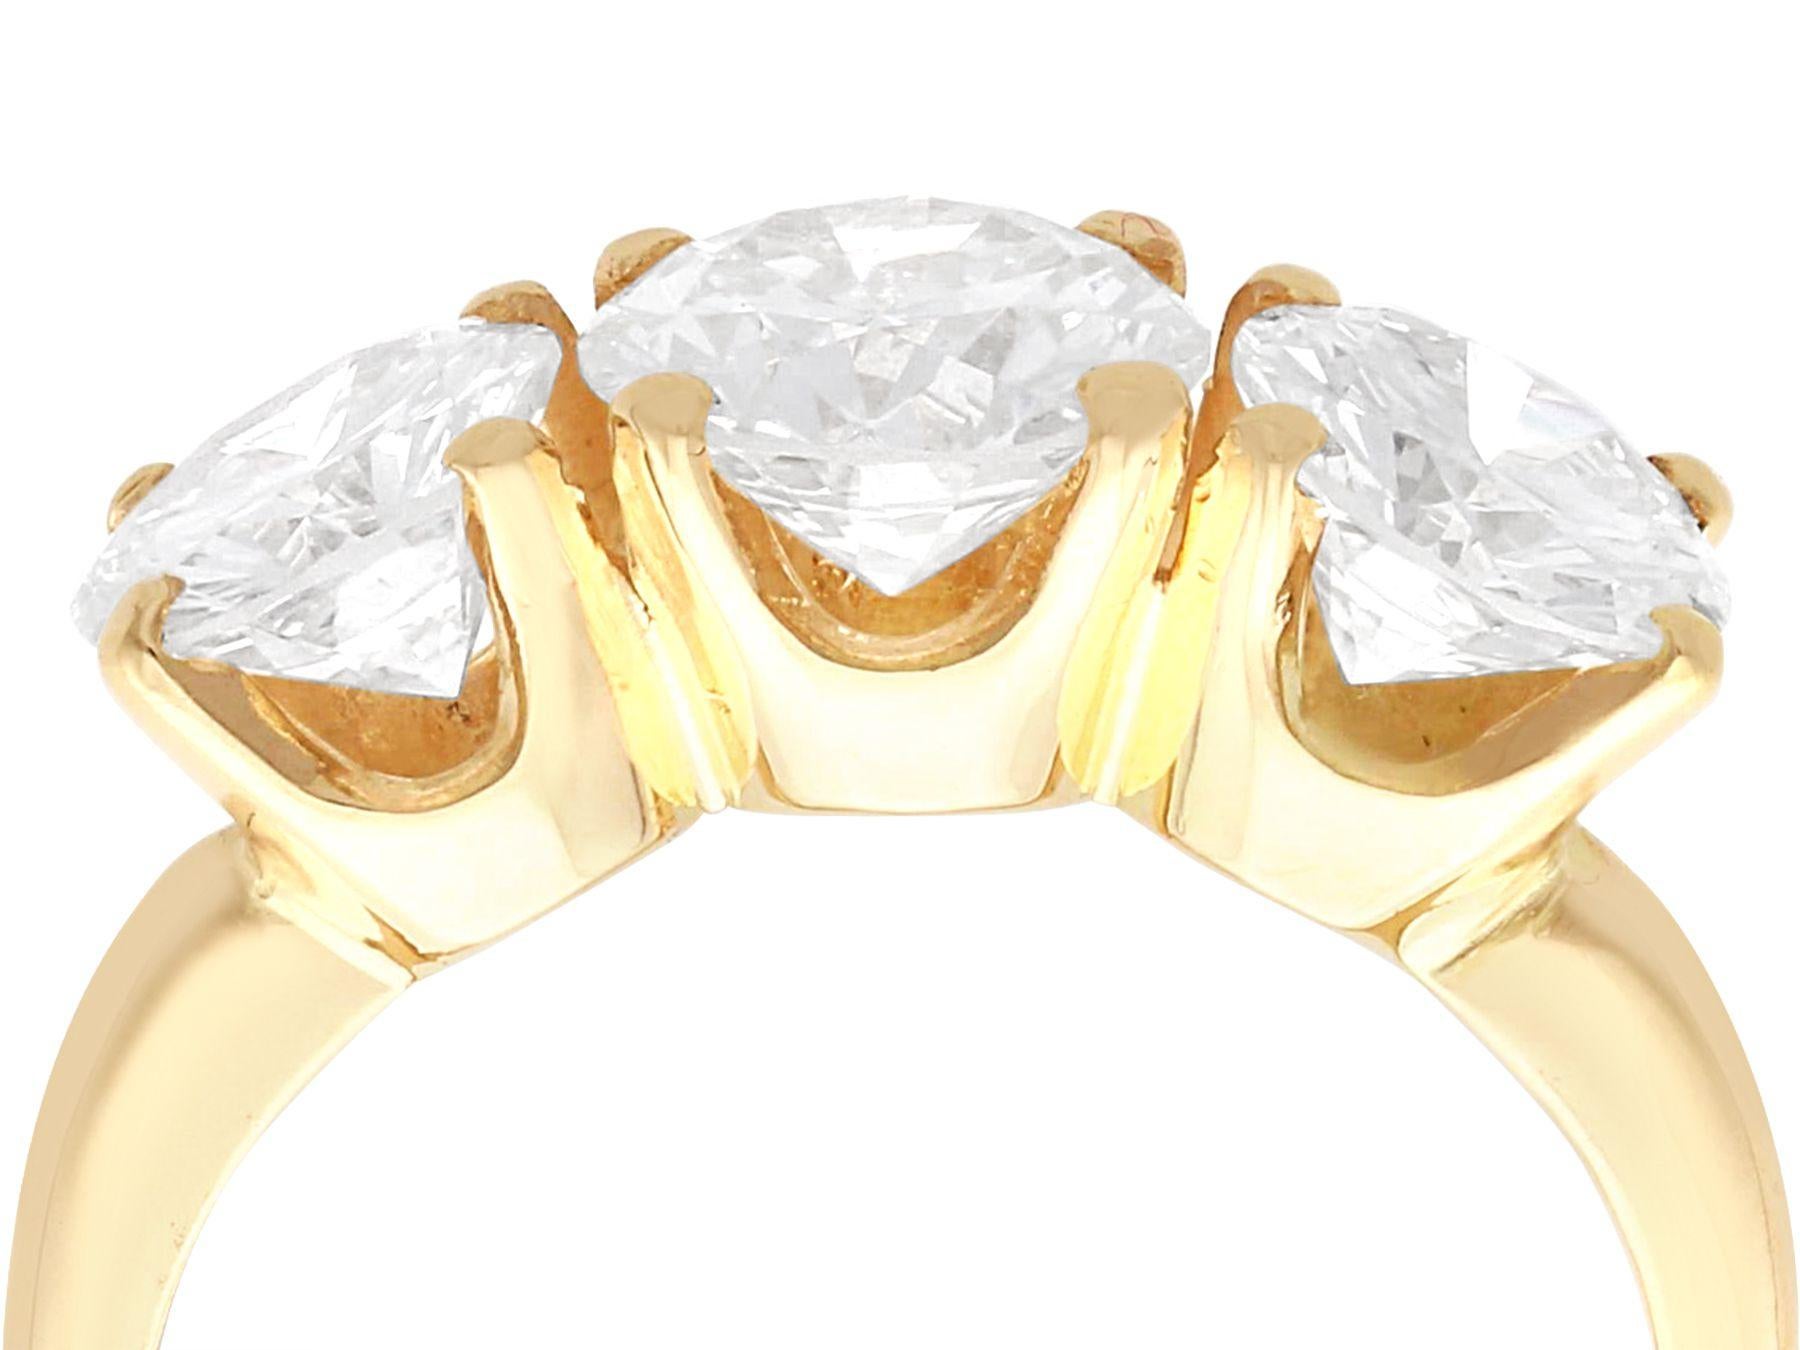 A stunning, fine and impressive vintage 3.49 carat diamond and 14 karat yellow gold trilogy ring; part of our diverse vintage diamond jewelry collections

This stunning, fine and impressive vintage trilogy ring has been crafted in 14k yellow